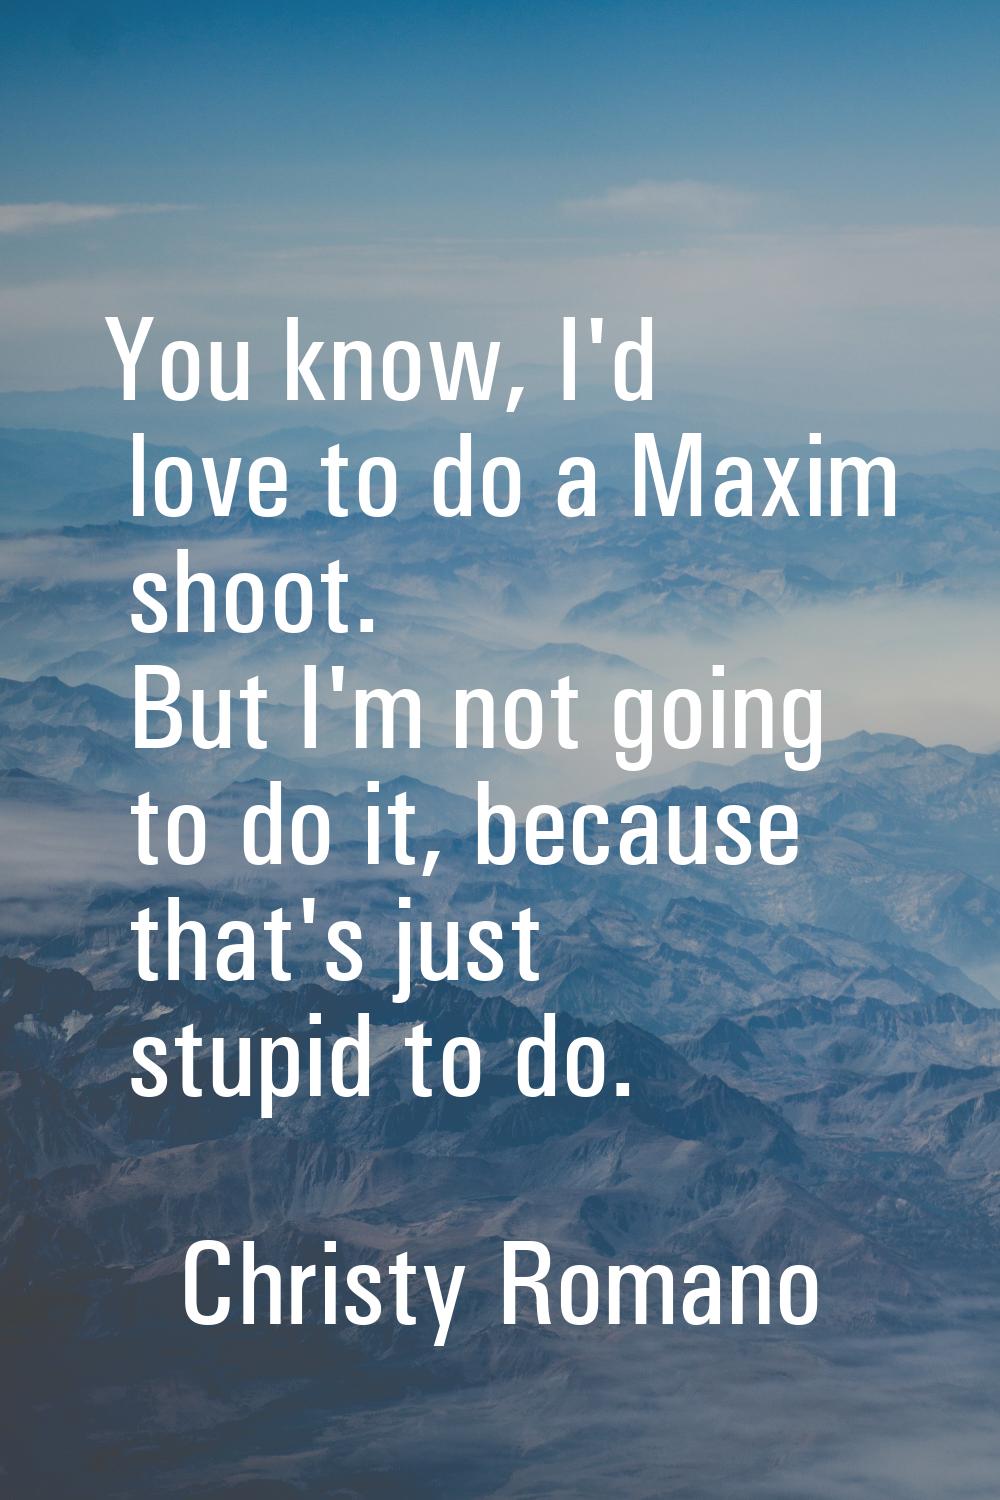 You know, I'd love to do a Maxim shoot. But I'm not going to do it, because that's just stupid to d